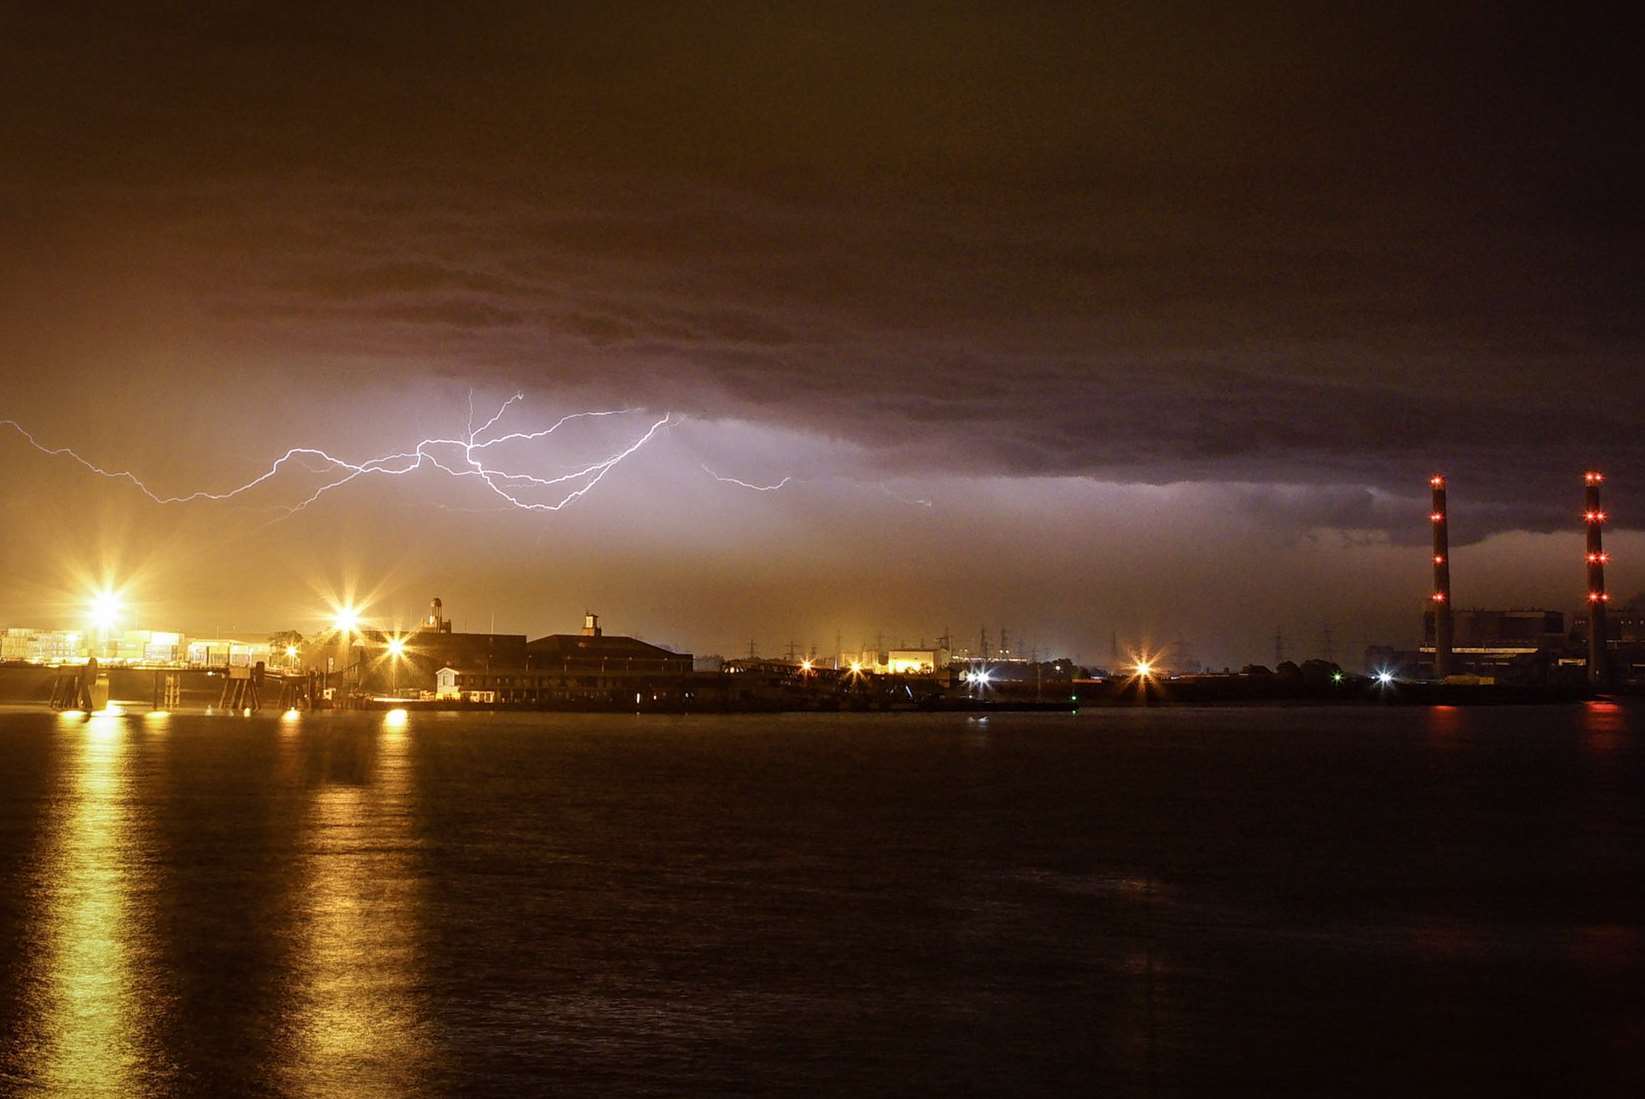 The storm over the River Thames at Gravesend. Picture: Artifex Productions @Artifextv